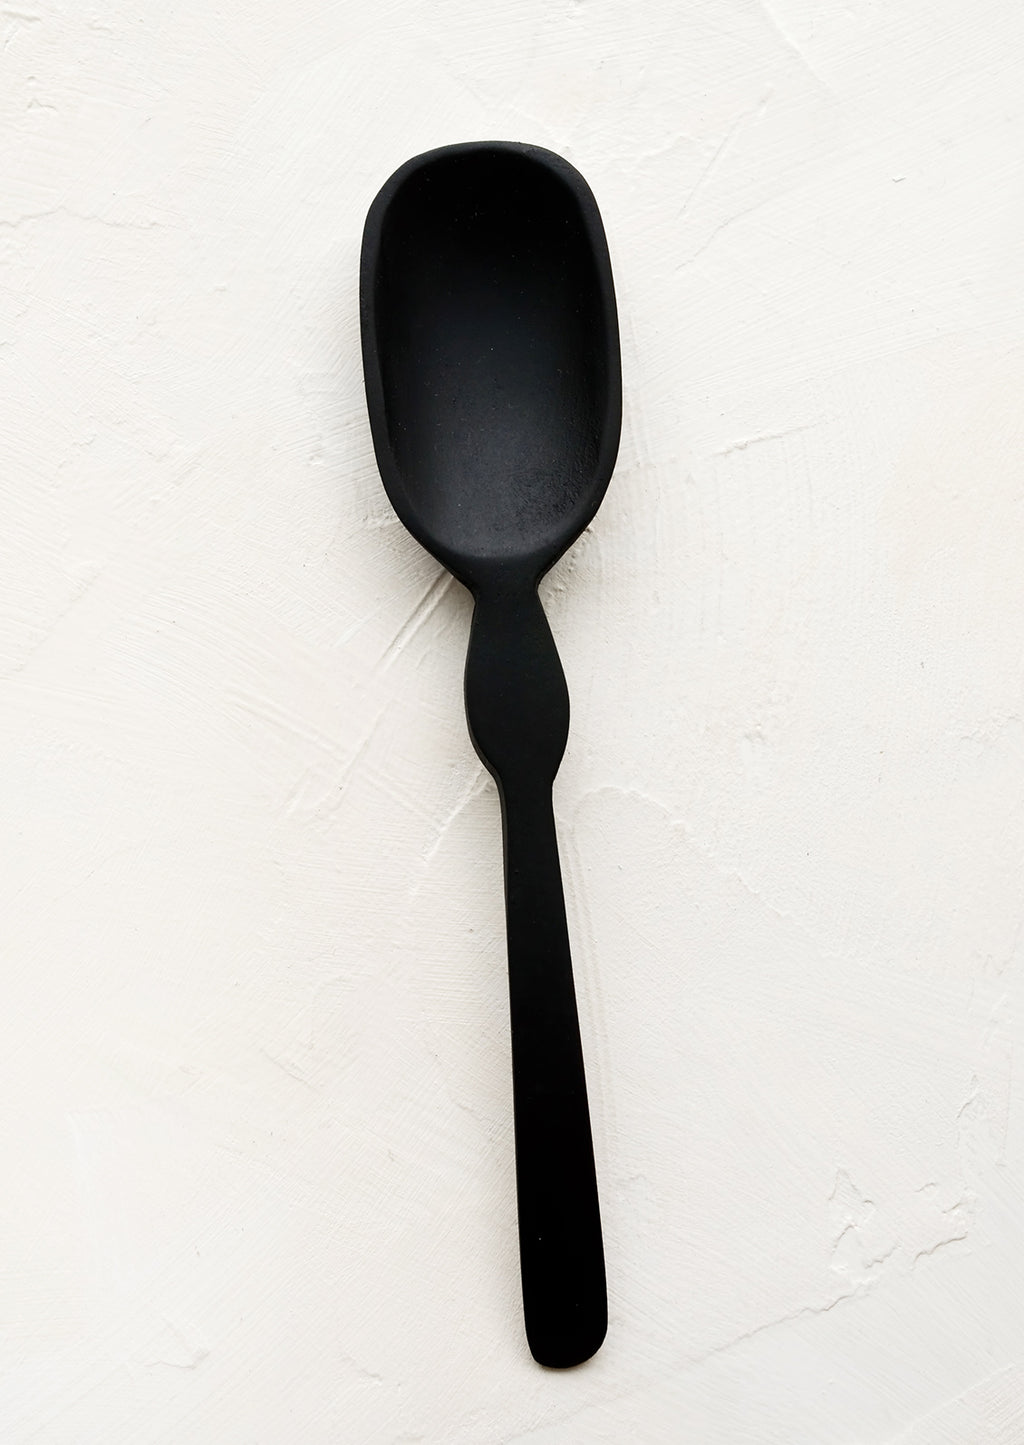 Standard: A carved black wooden spoon with decoratively curved handle.